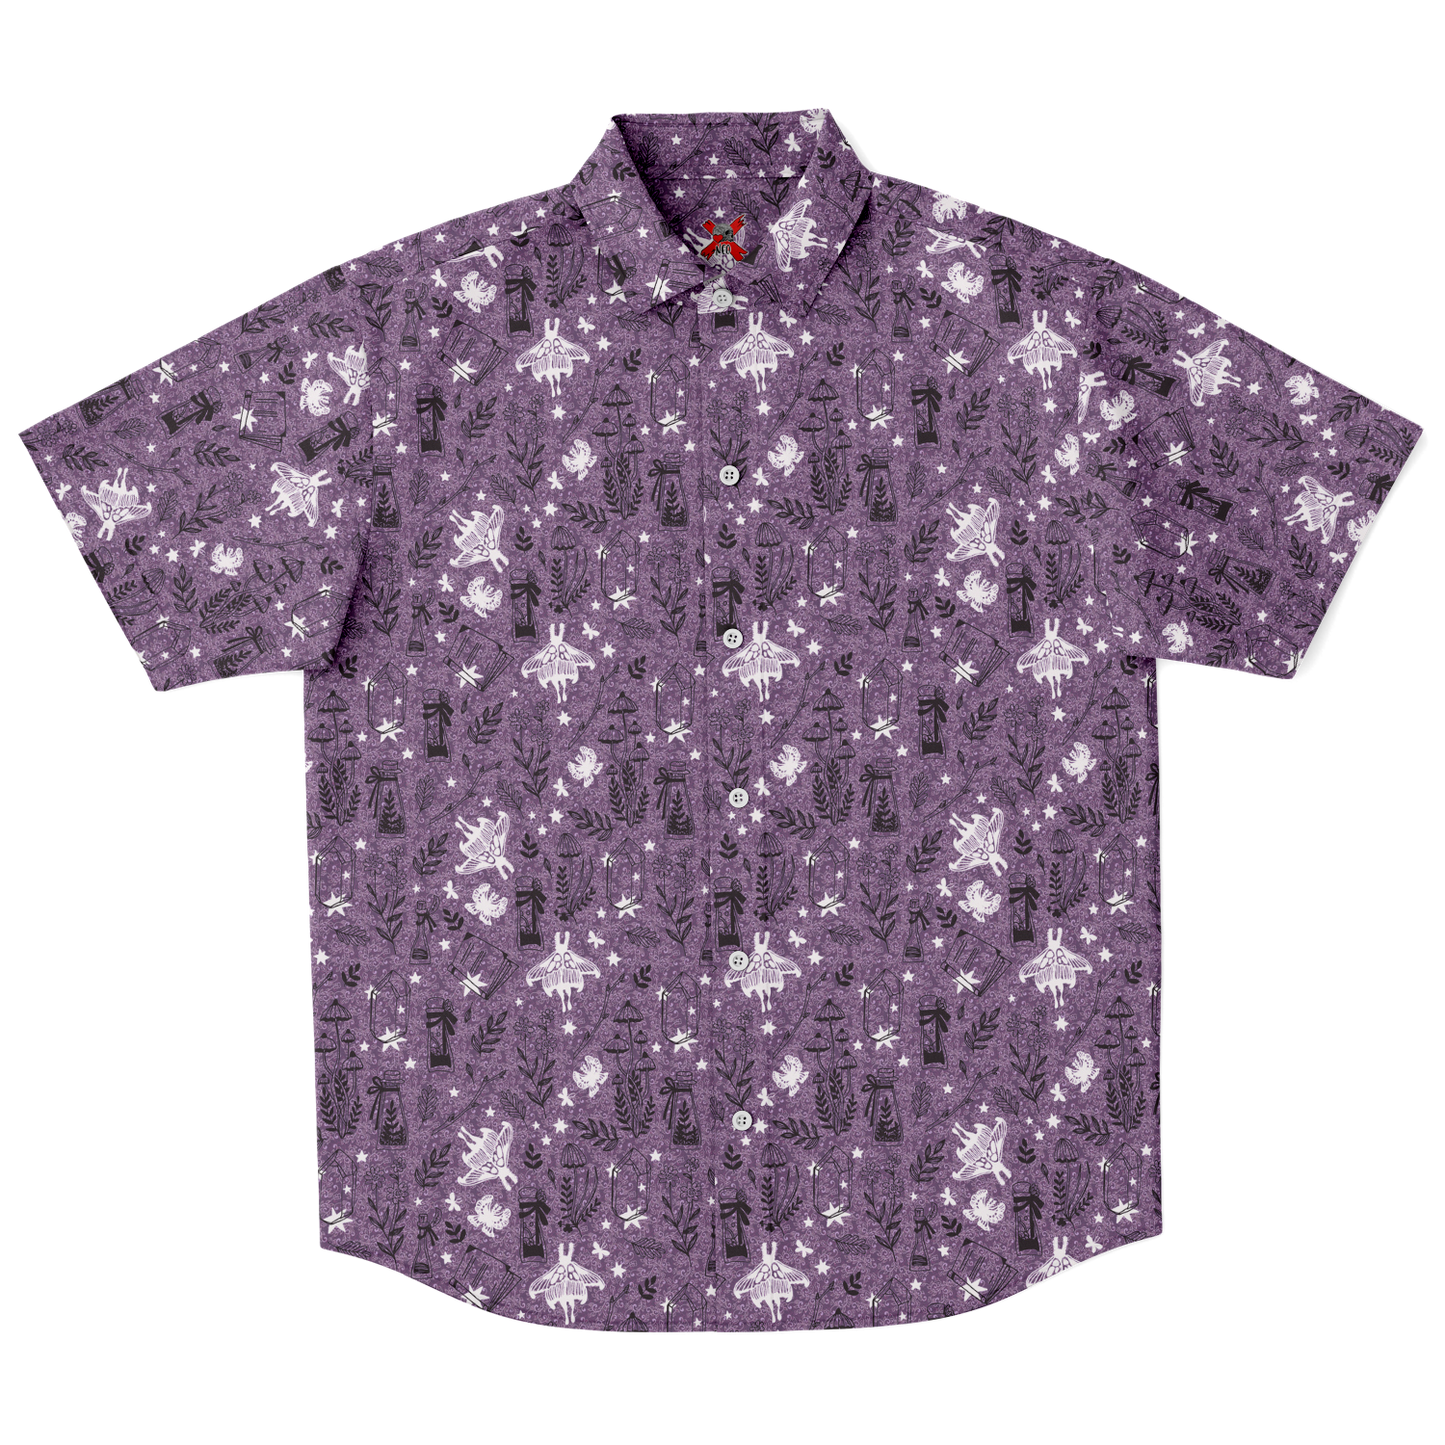 Witchy story short sleeve button-up shirt.